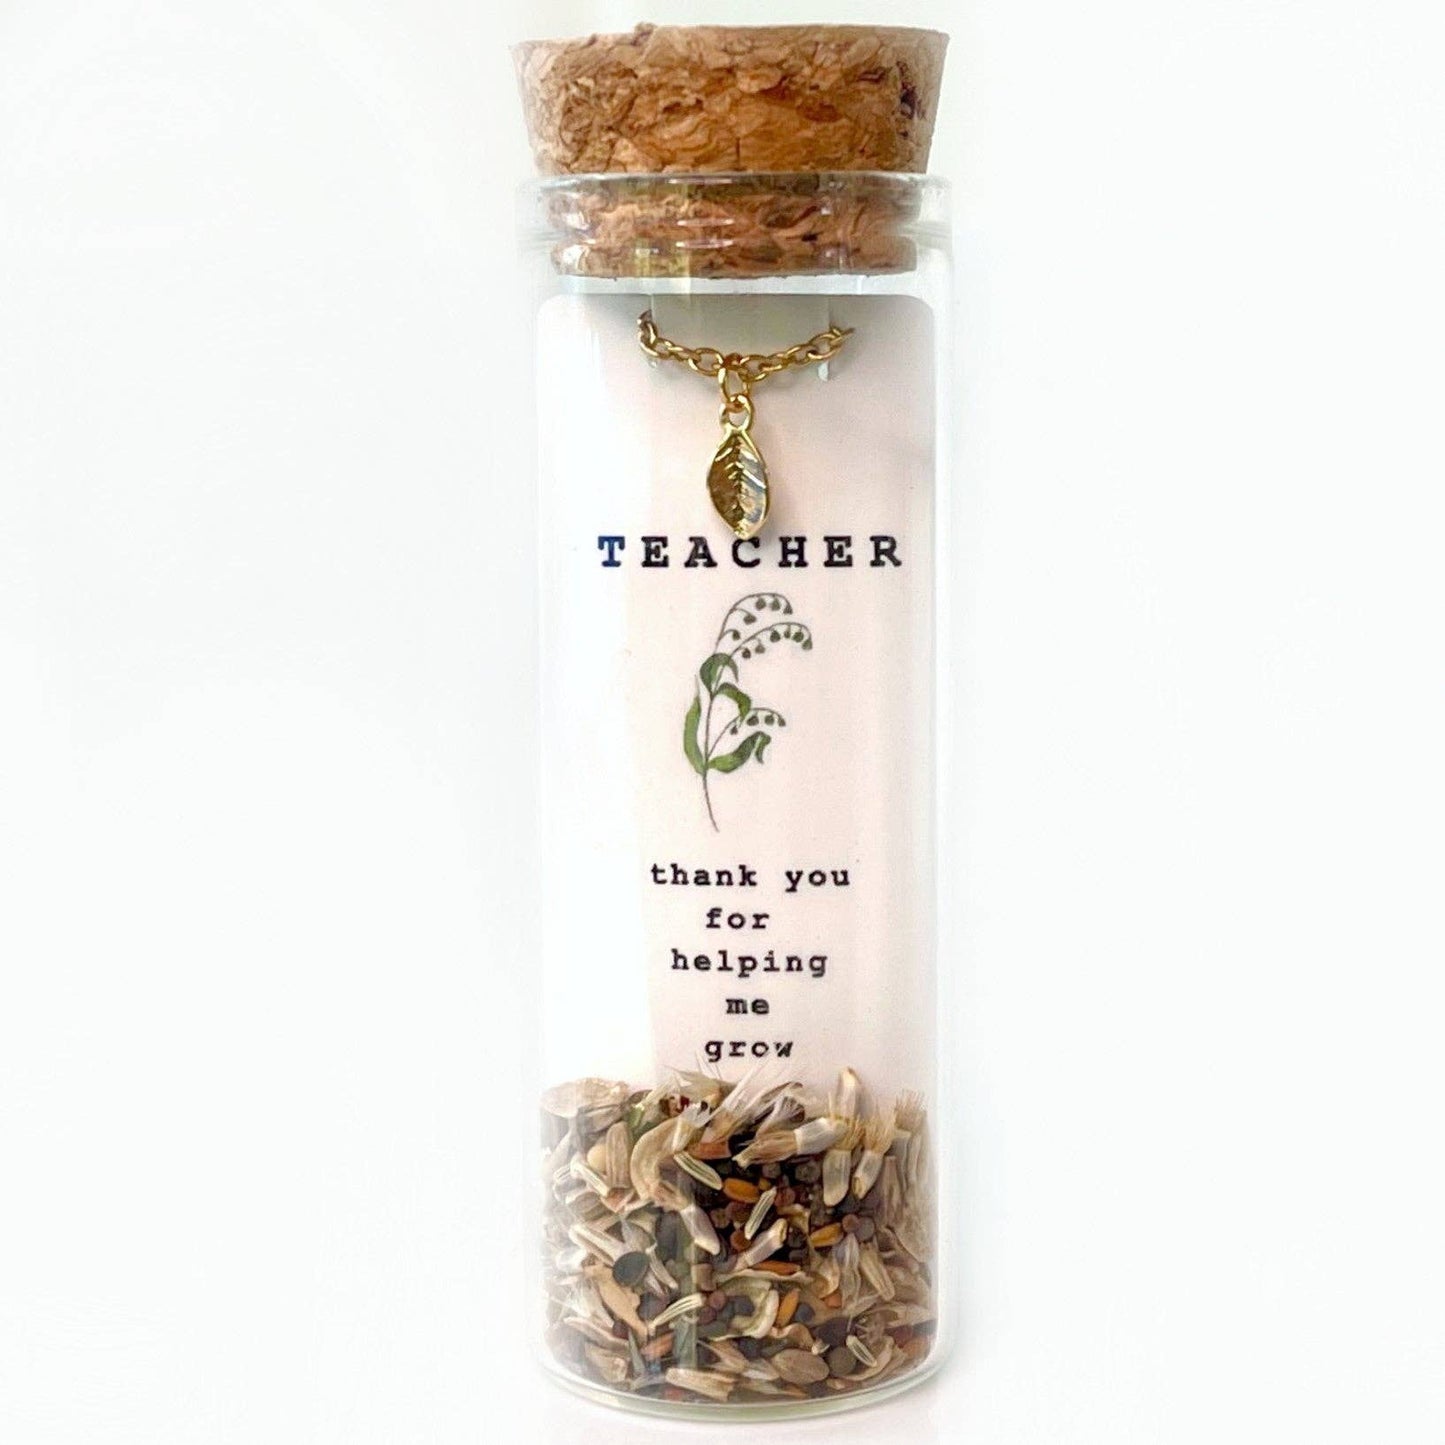 Teacher. Thank you for helping me grow + wild flower seed mix